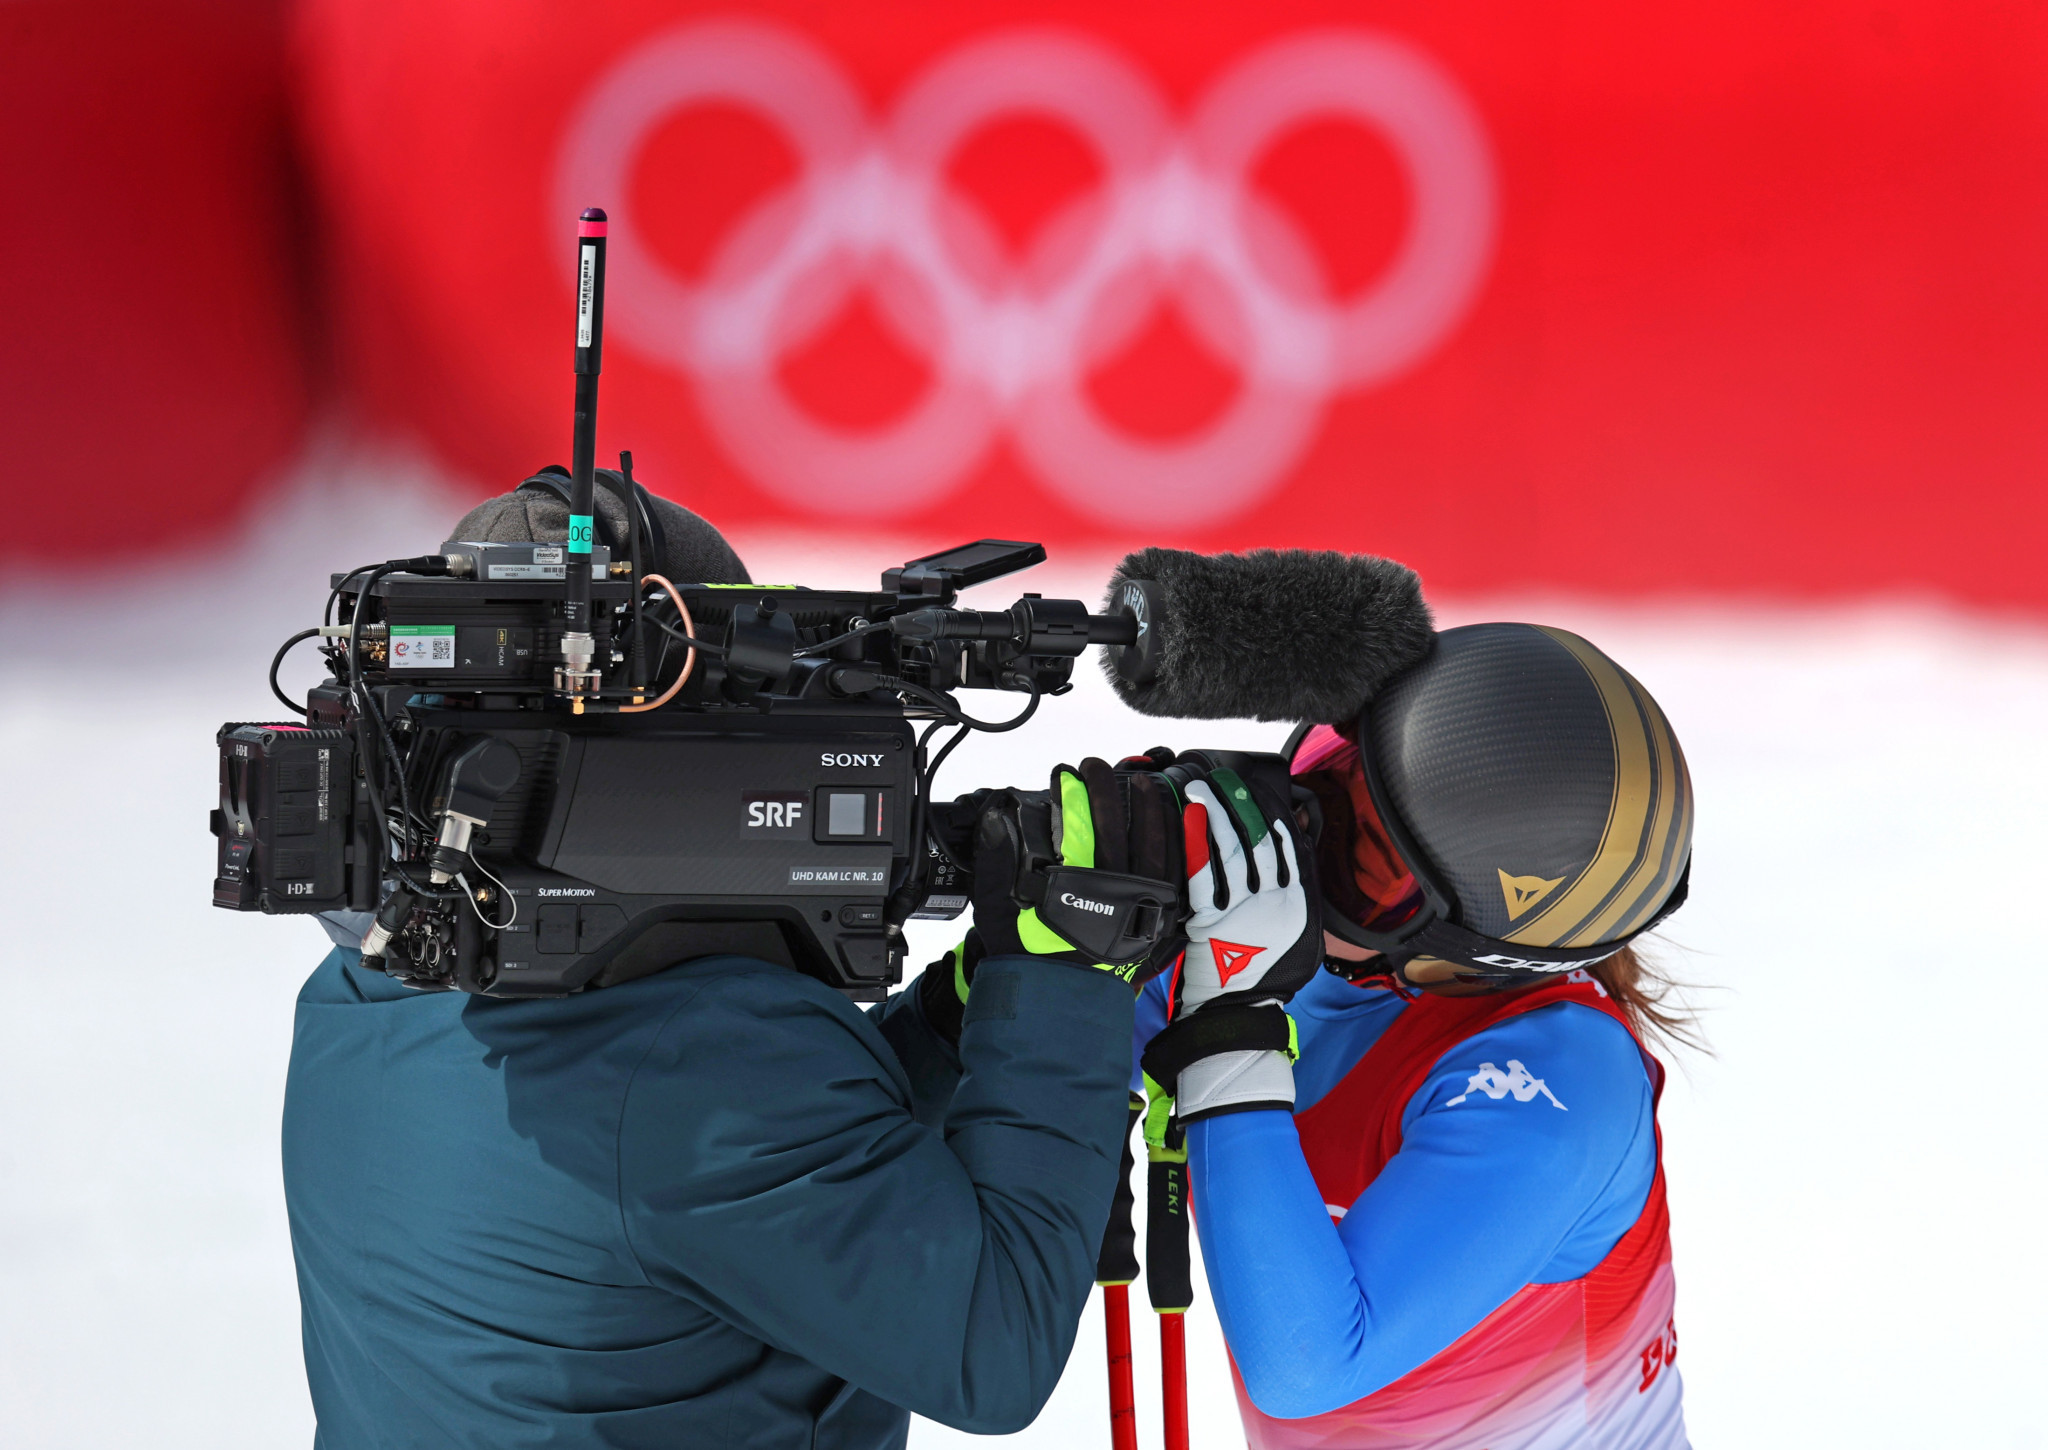 Media companies are digesting the results of their Beijing 2022 coverage ©Getty Images